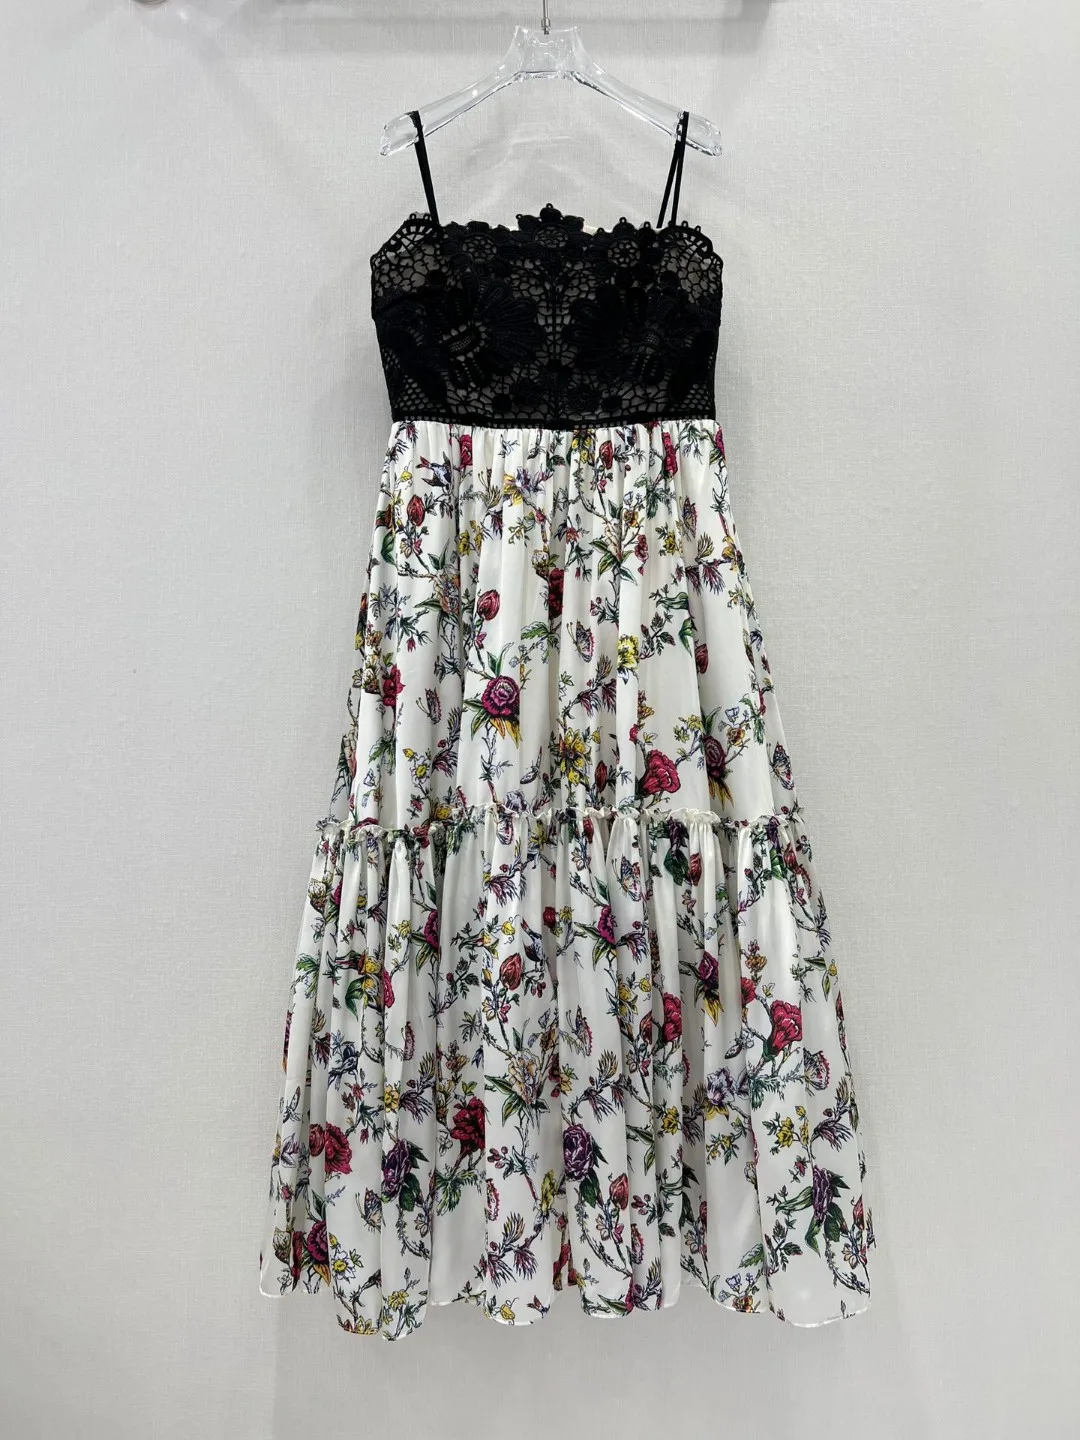 2023 spring and summer women's clothing fashion new Patchwork Embroidered Strap Printed Flower Dress 0511